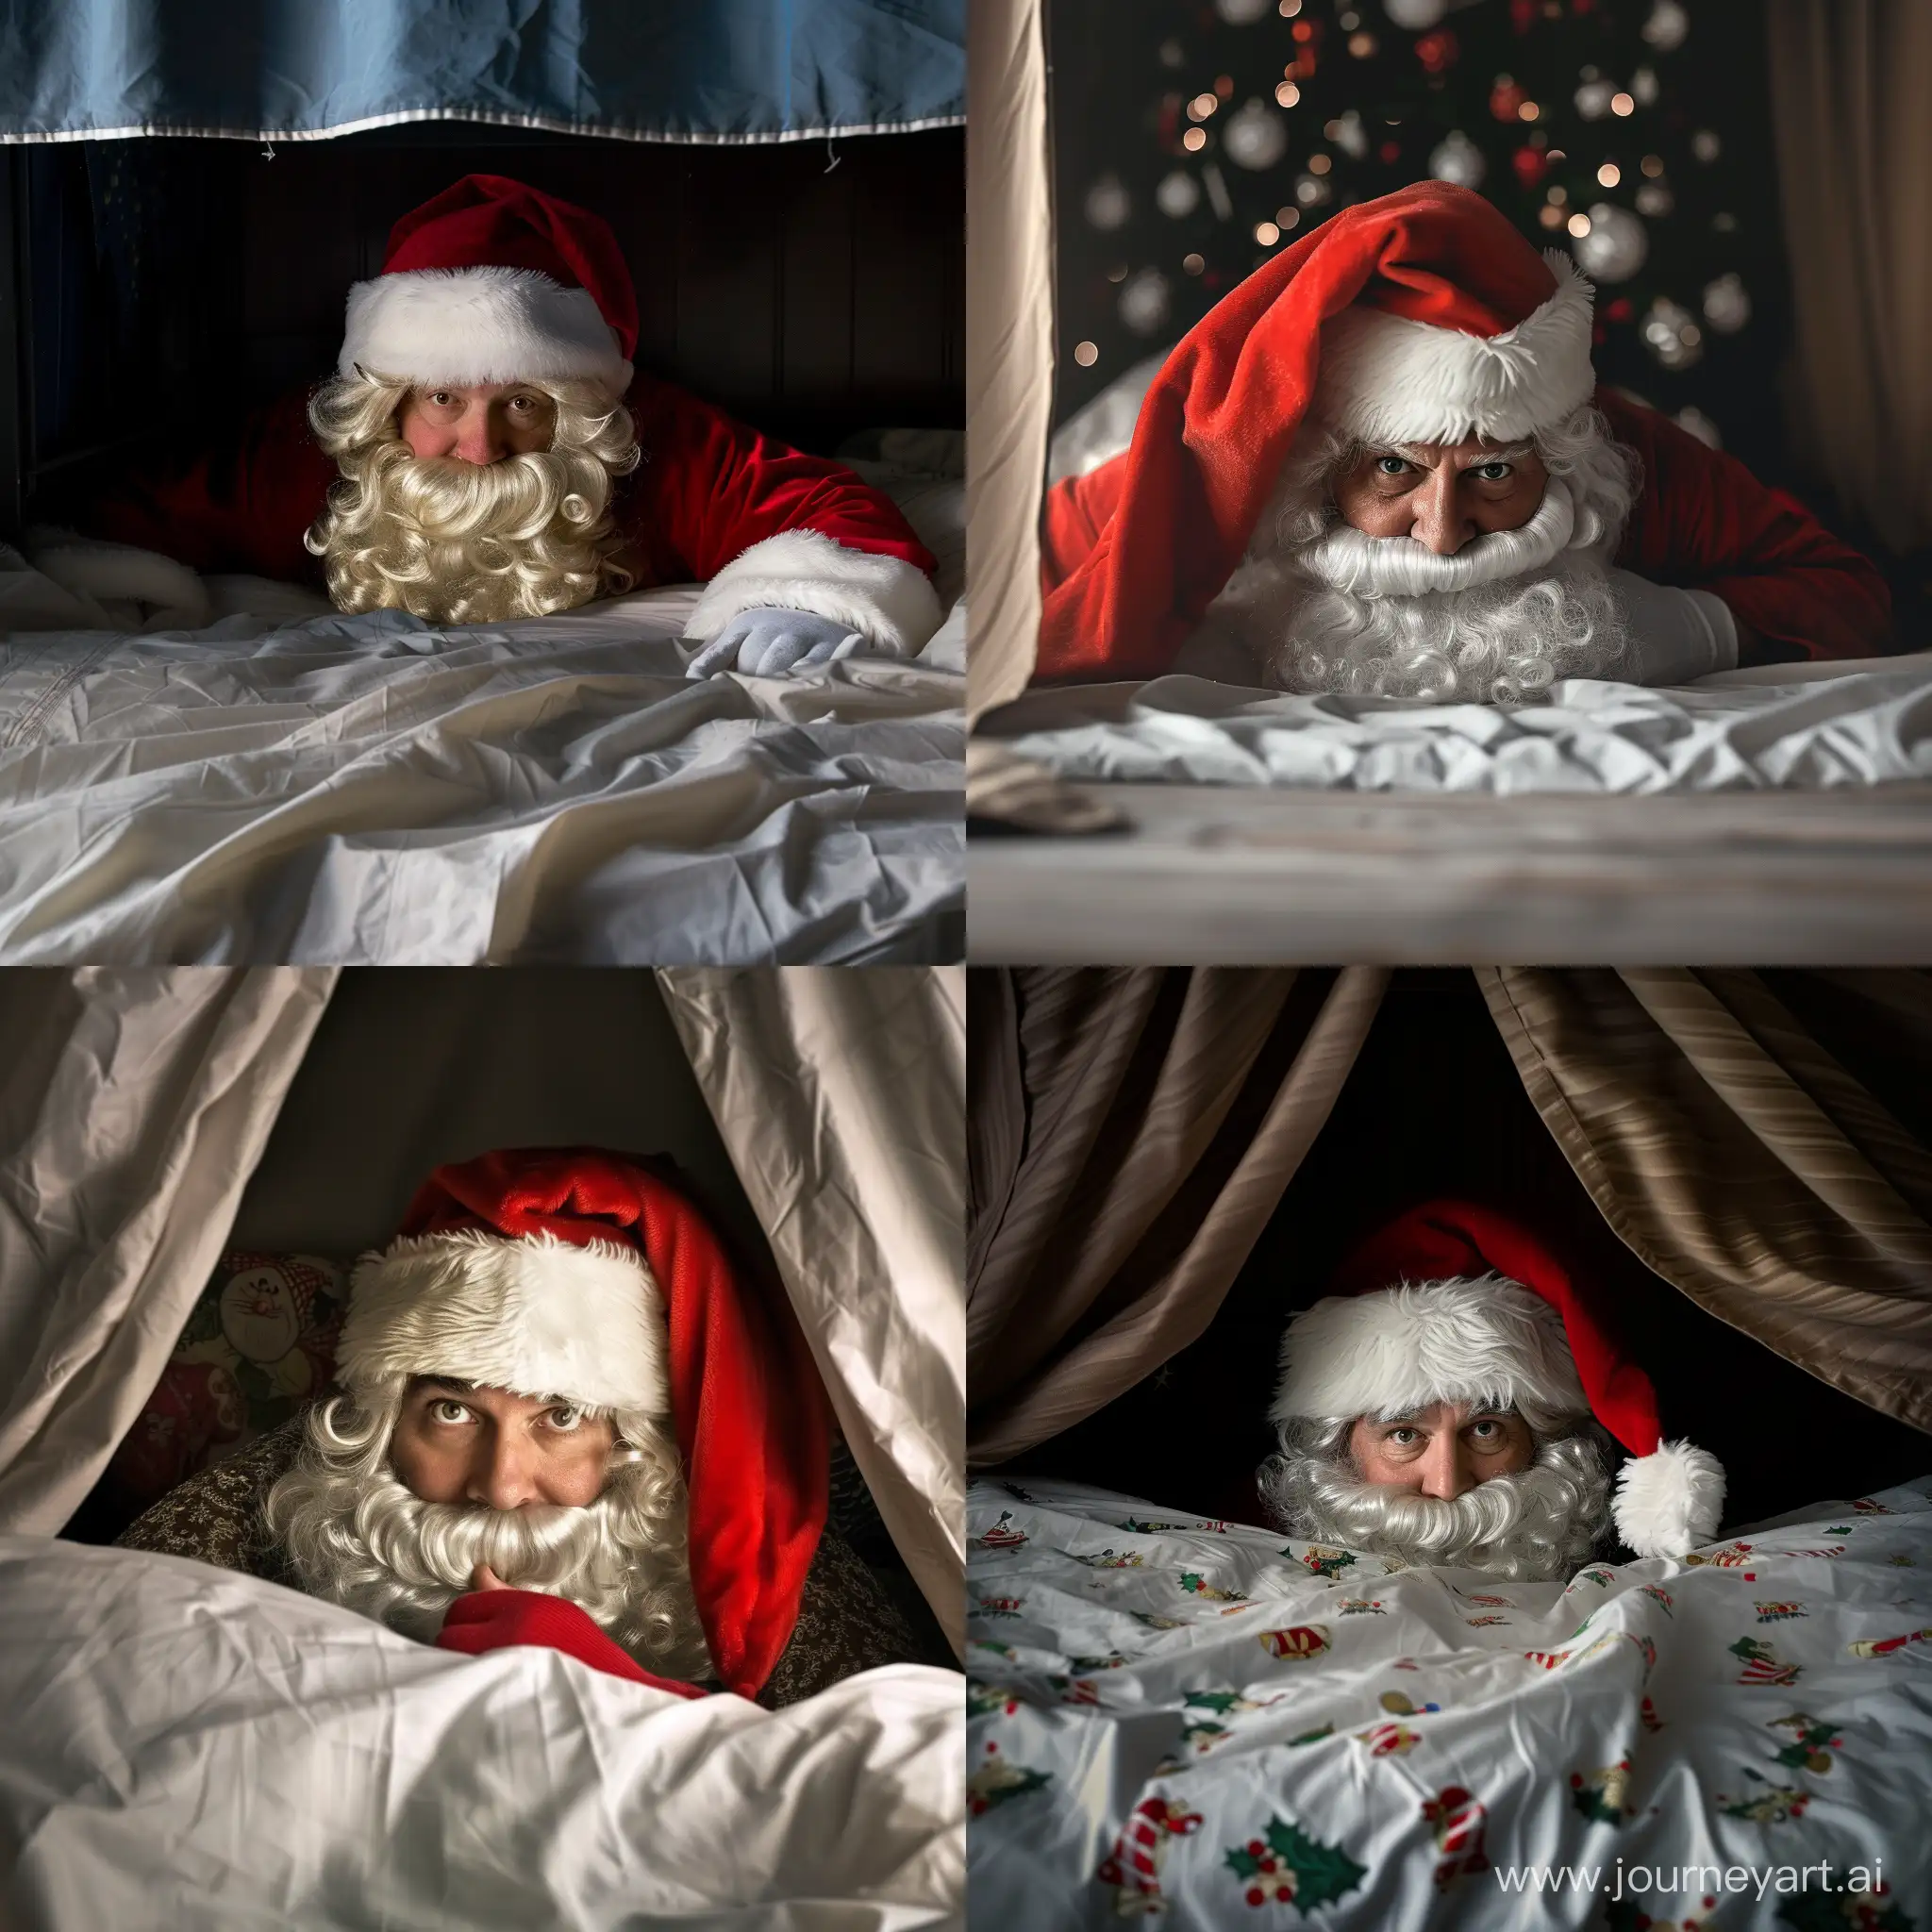 Eerie-Photorealistic-Santa-Claus-Lurking-Under-the-Bed